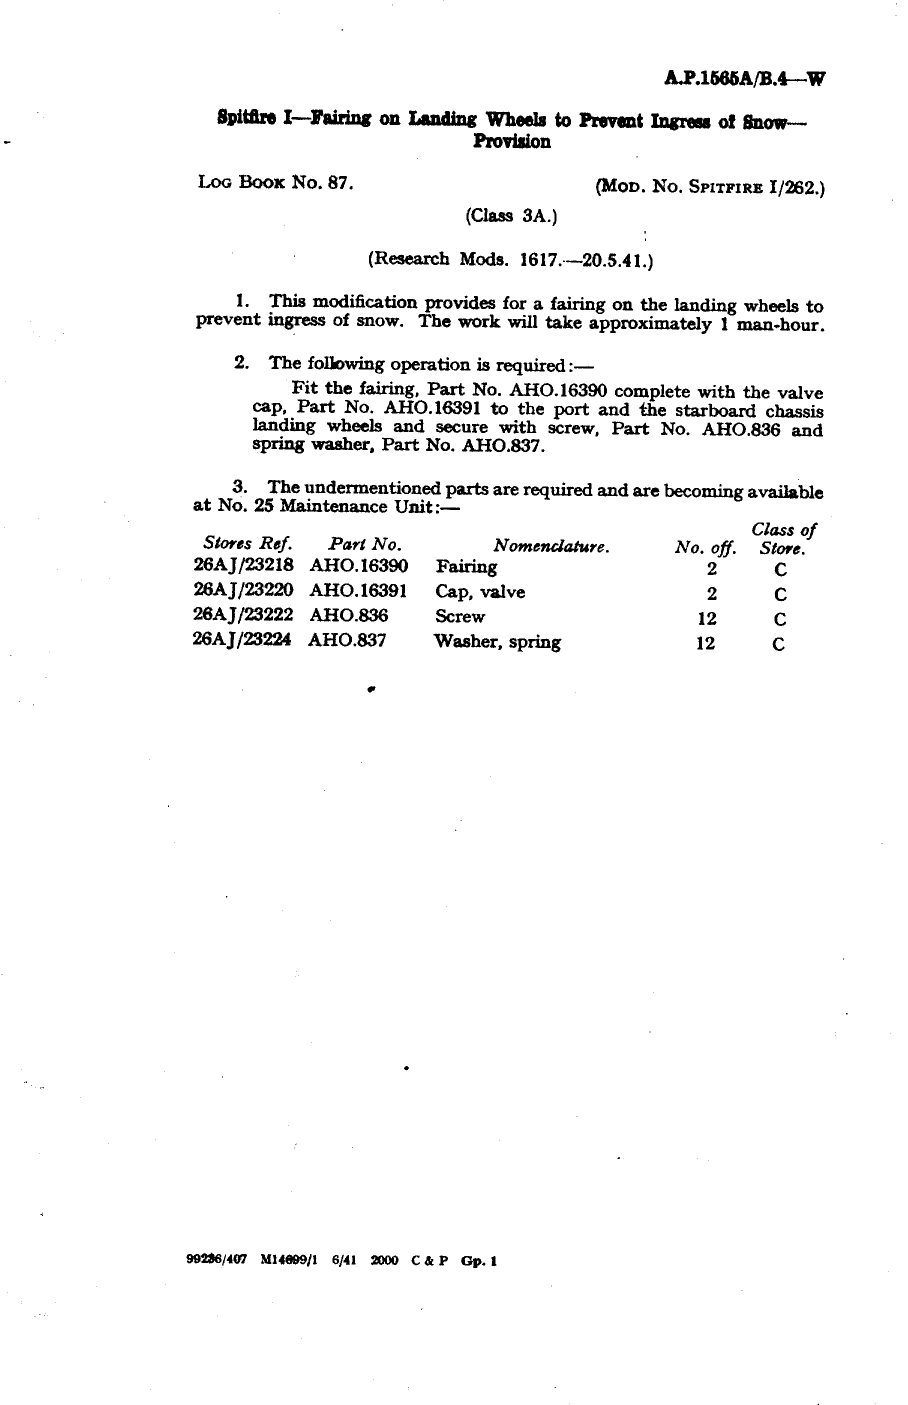 Sample page 1 from AirCorps Library document: Spitfire I Fairing on Landing Wheels to Prevent Ingress of Snow Provision